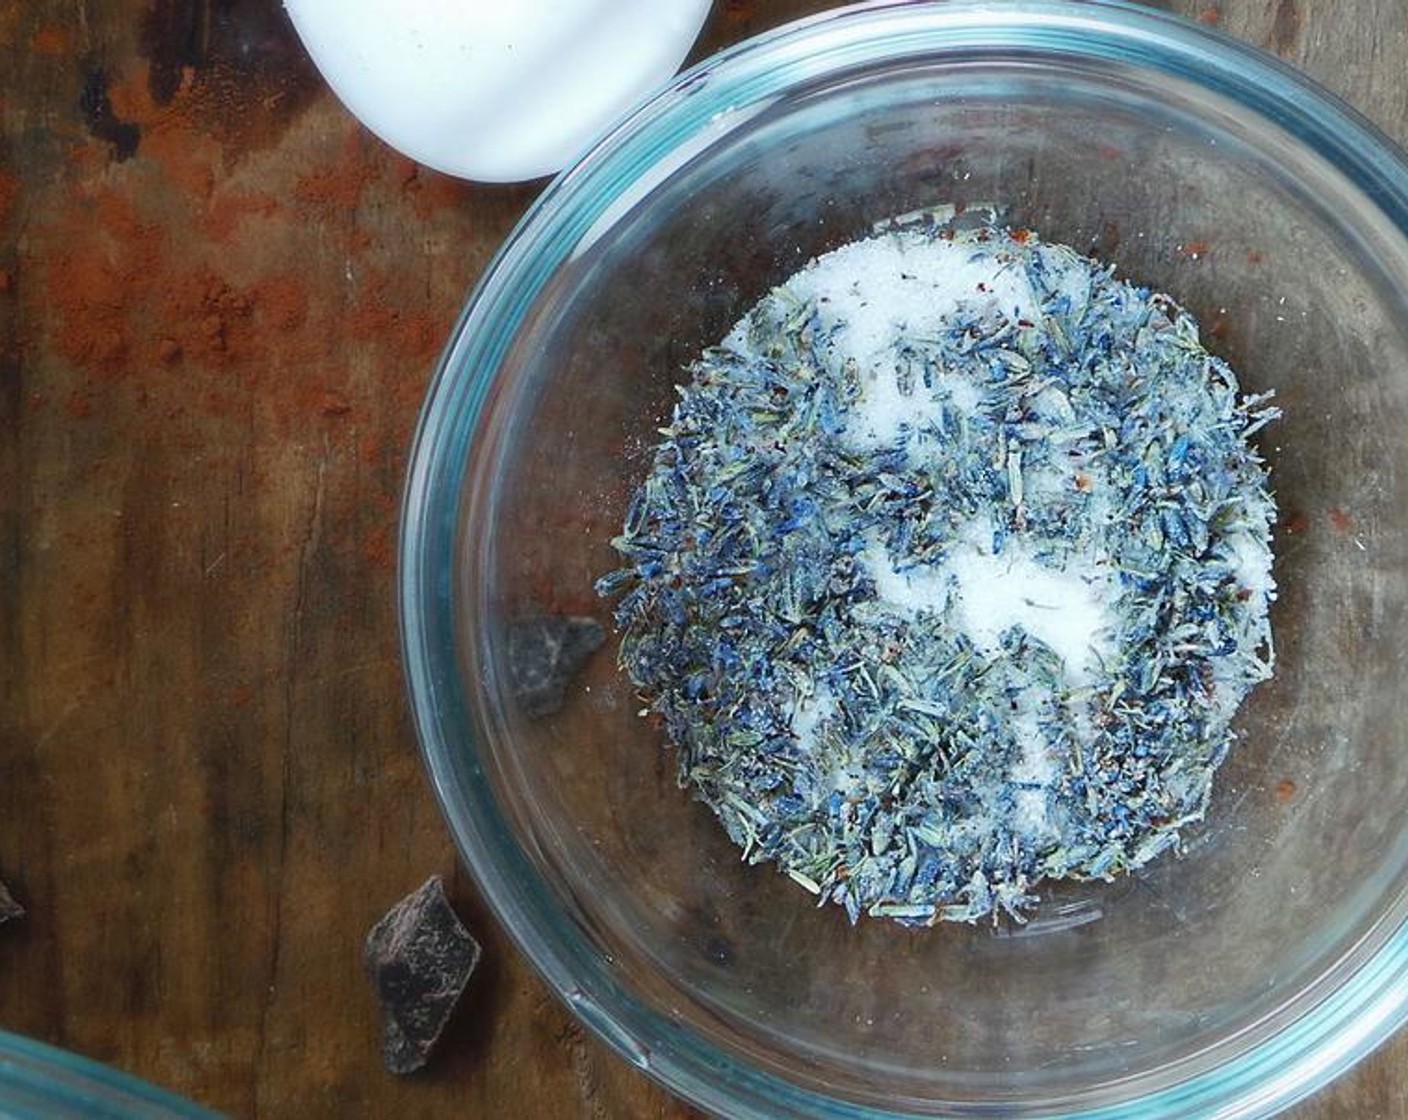 step 2 Place the Dried Lavender Bulbs (1 tsp) in a spice grinder with 1 tablespoon of the Granulated Sugar (1 Tbsp) and pulse until finely ground. You can also do this in a mortar and pestle!